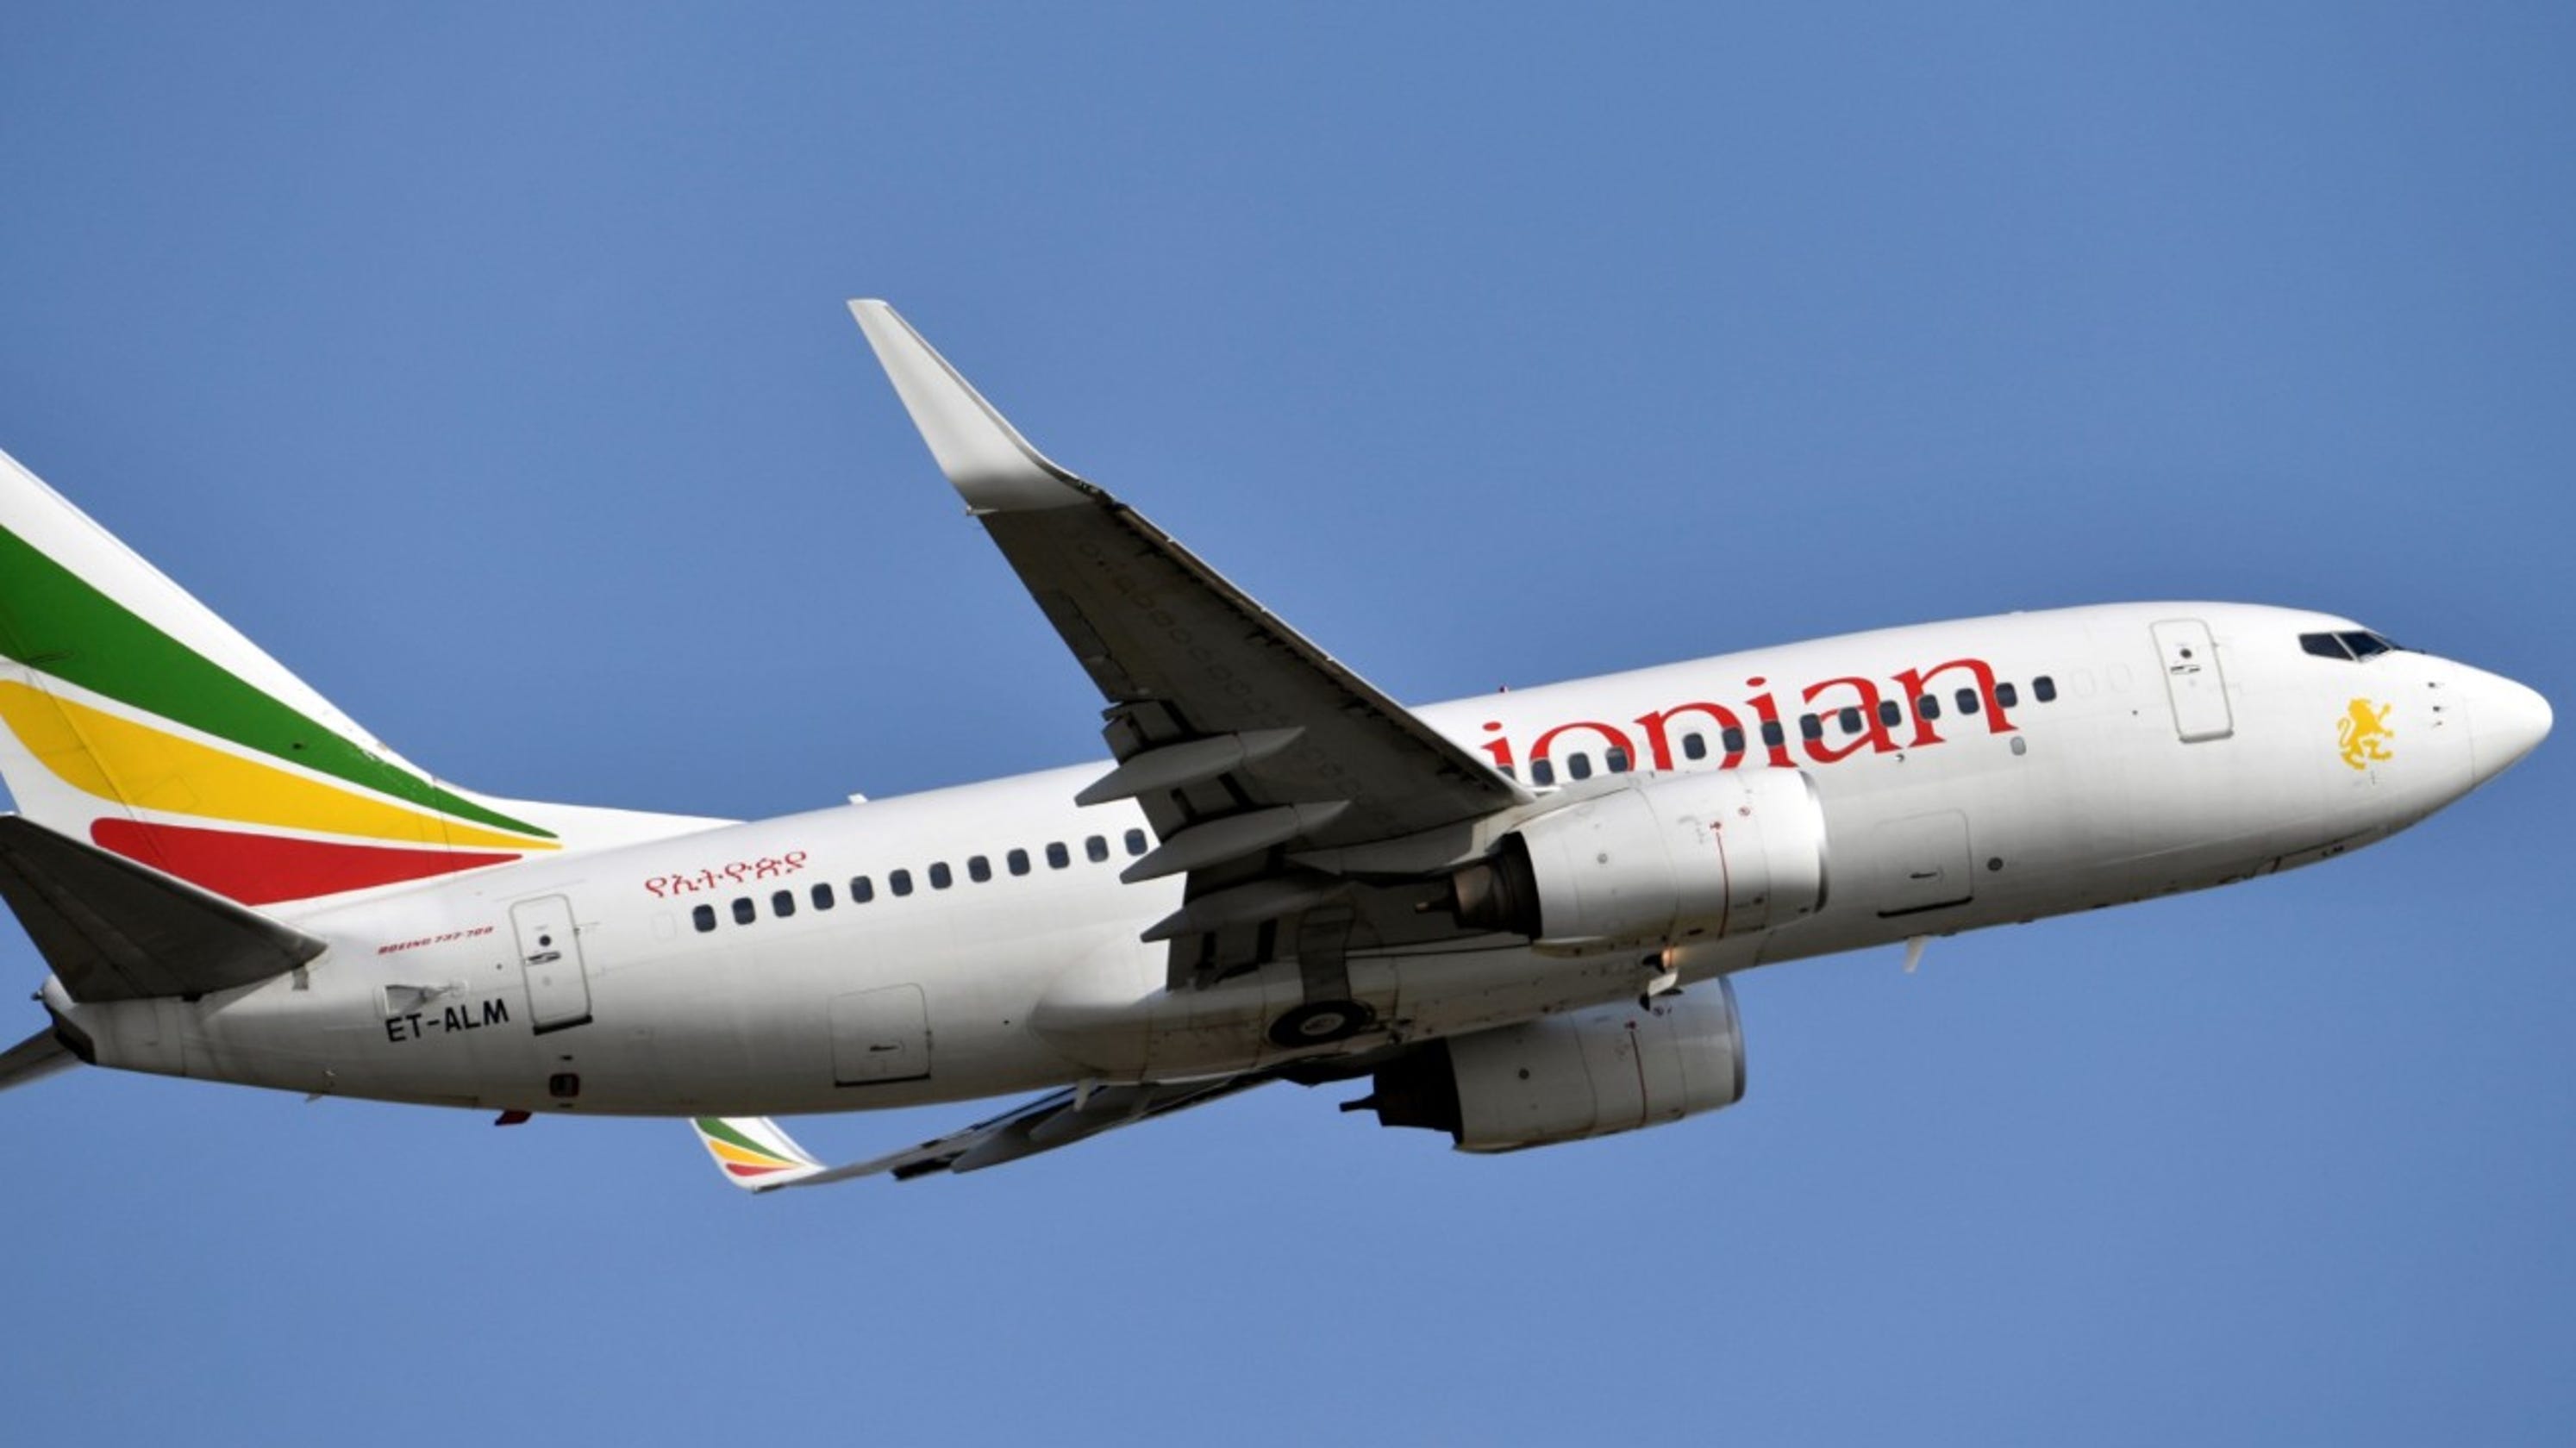 Boeing stock price likely to rebound after Ethiopian Airlines crash2988 x 1680